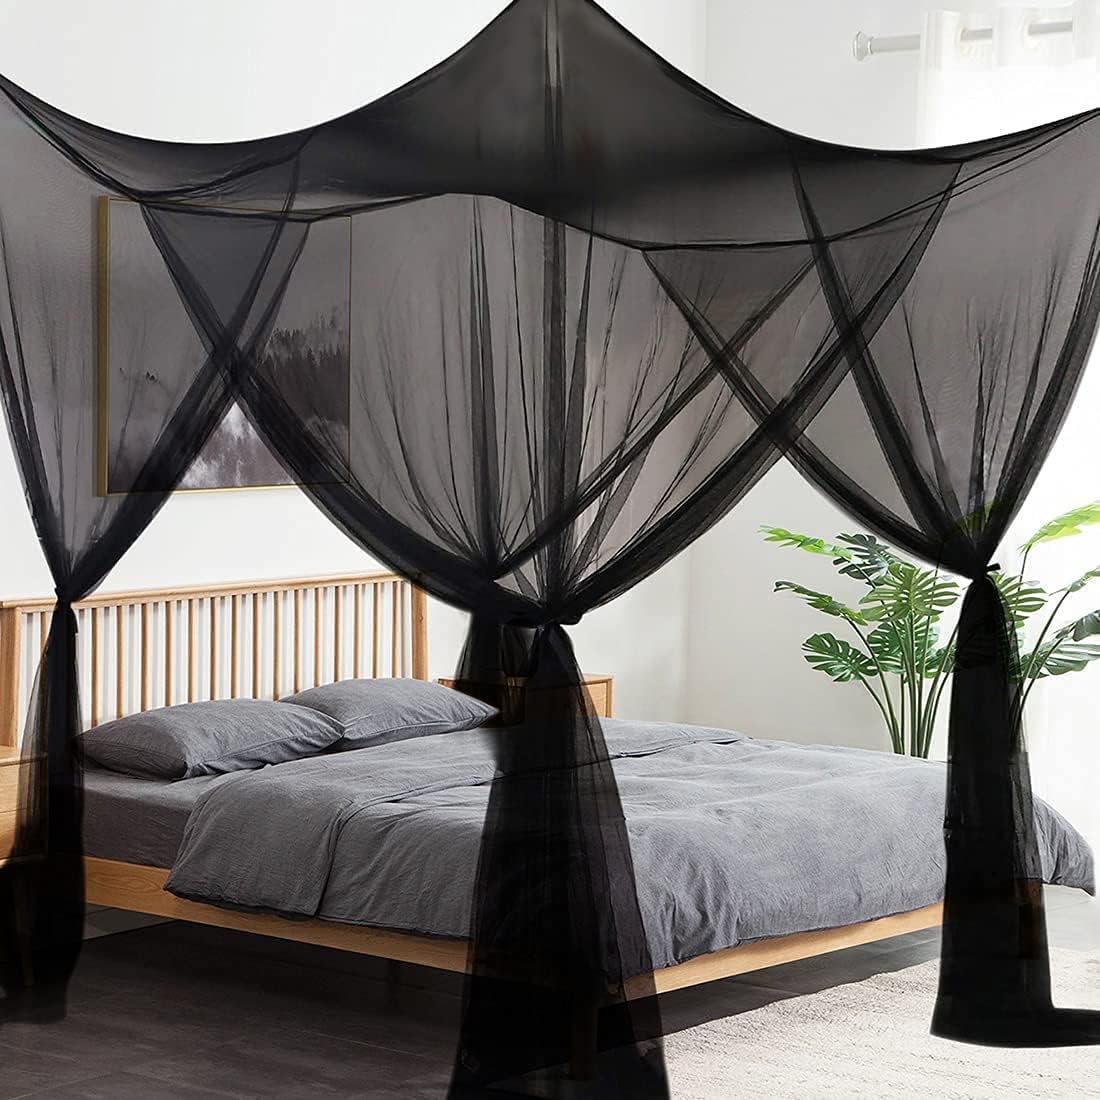 4 Corners Post Bed Canopy Curtain Mosquito Net Or Frame Twin Full Queen King New 